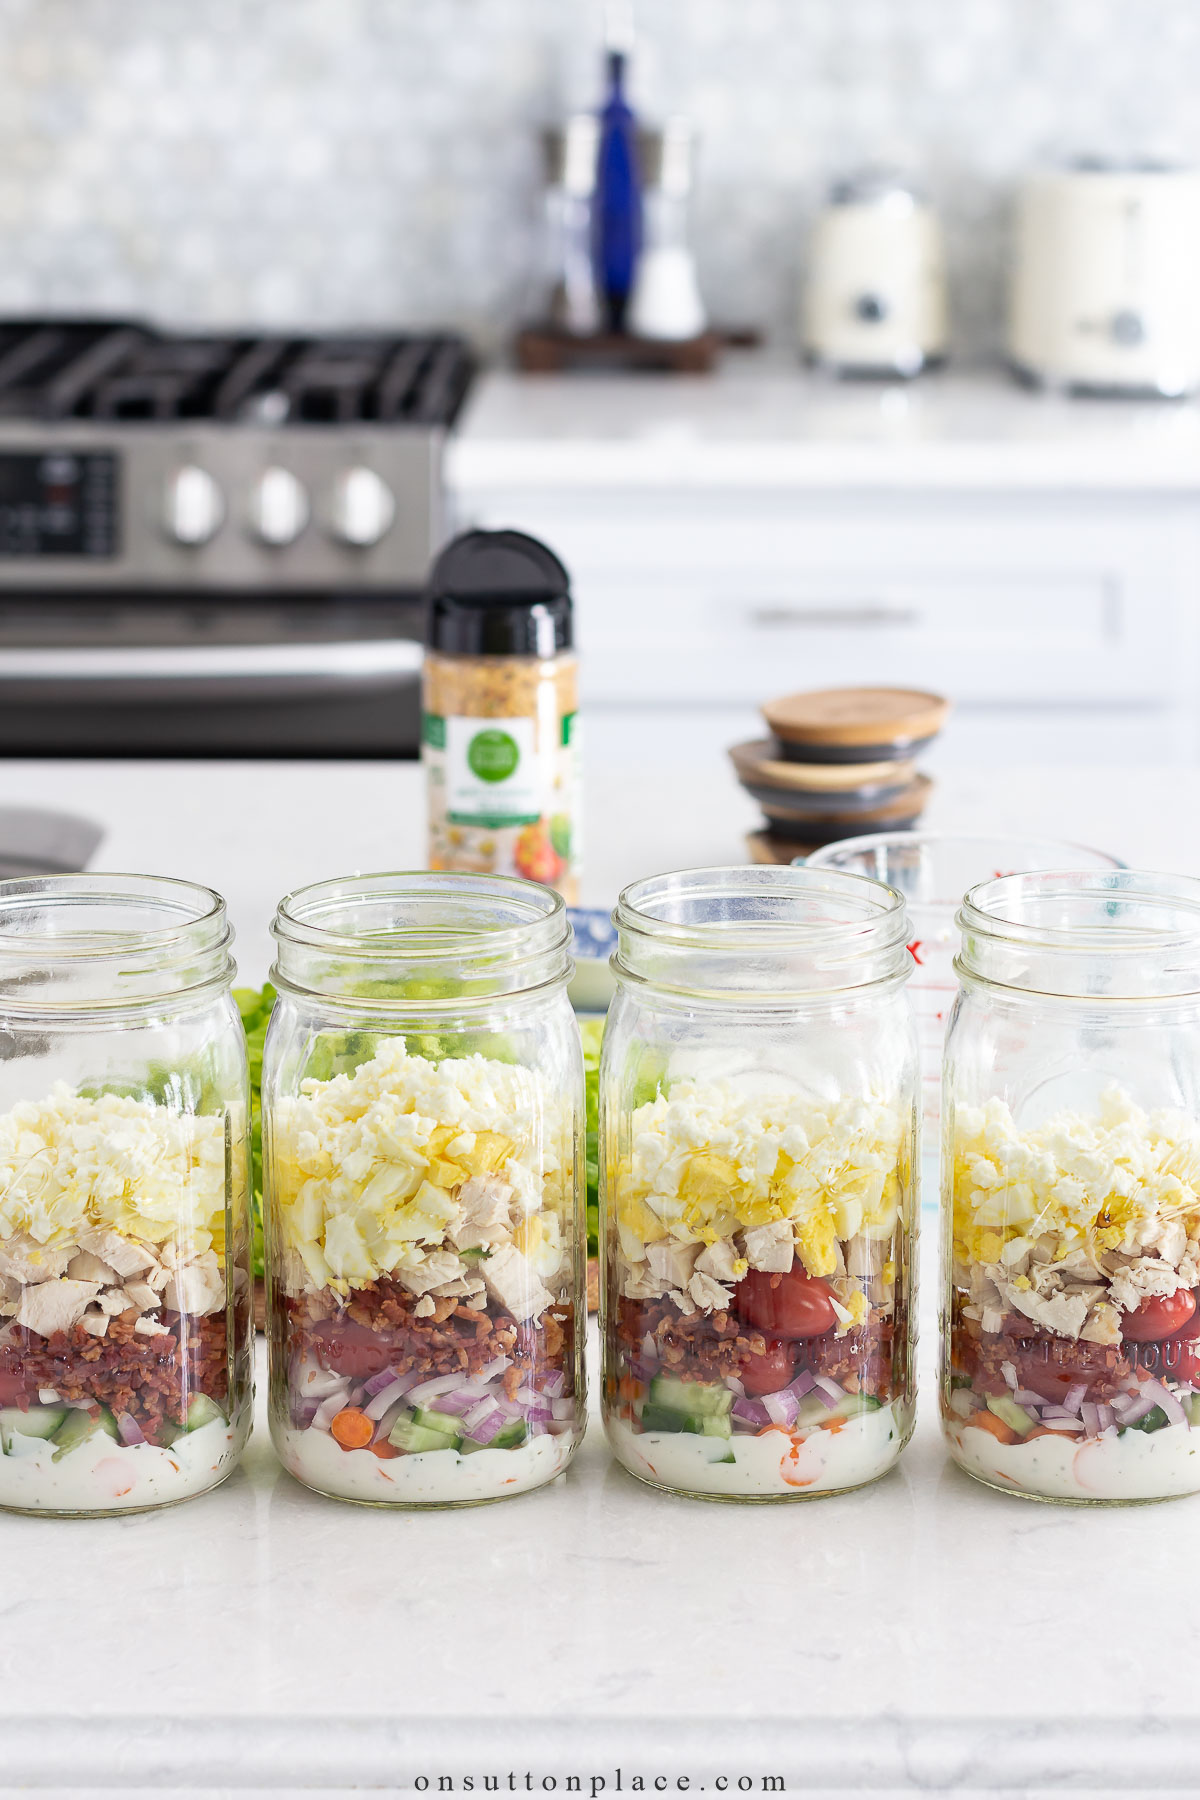 https://www.onsuttonplace.com/wp-content/uploads/2023/04/meal-prep-salads-layered-in-mason-jars.jpg